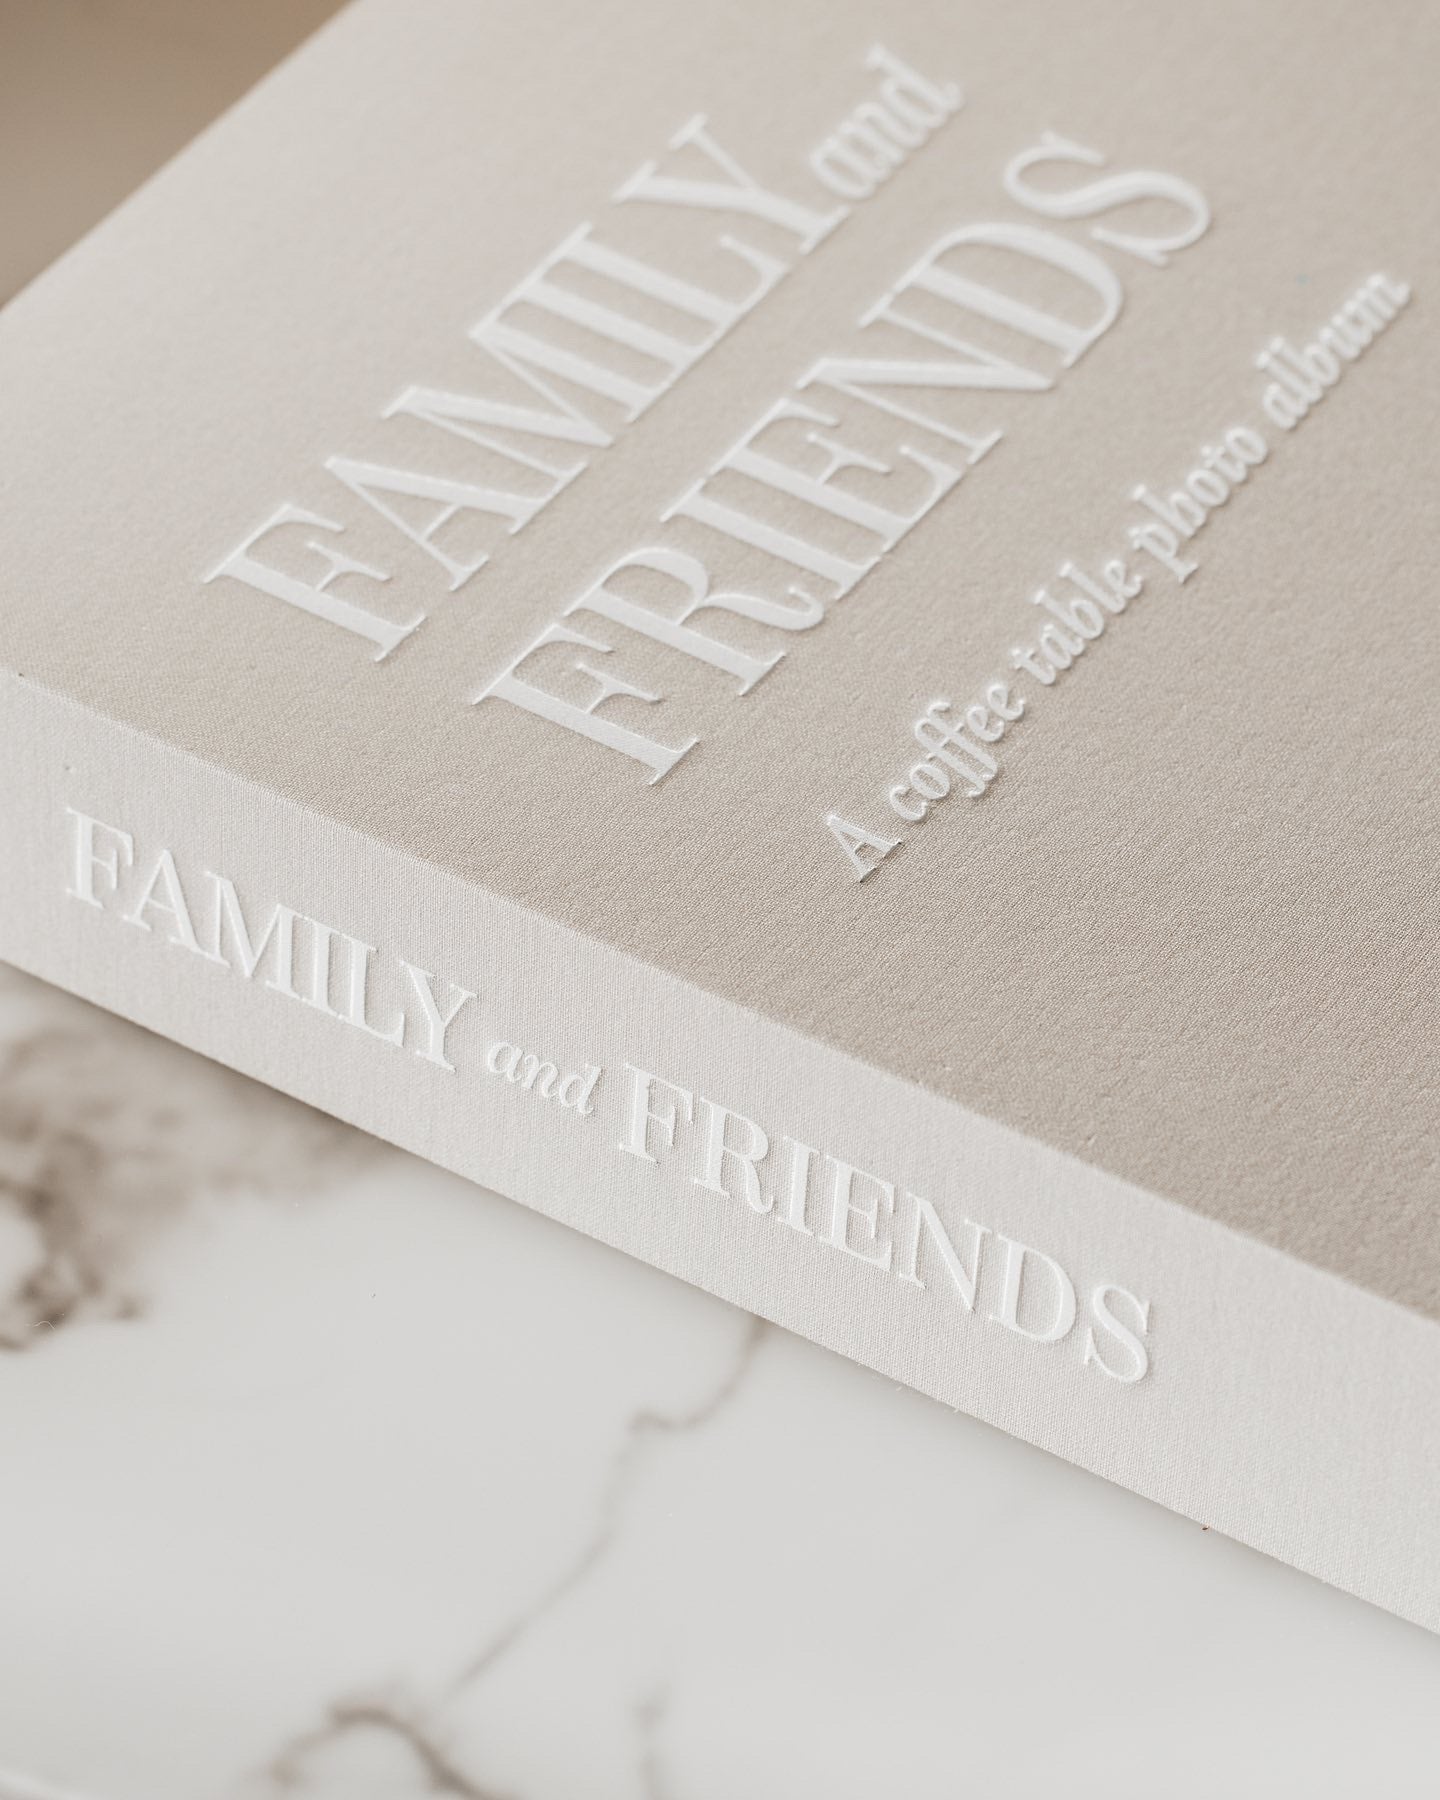 Album photo « Family and friends »